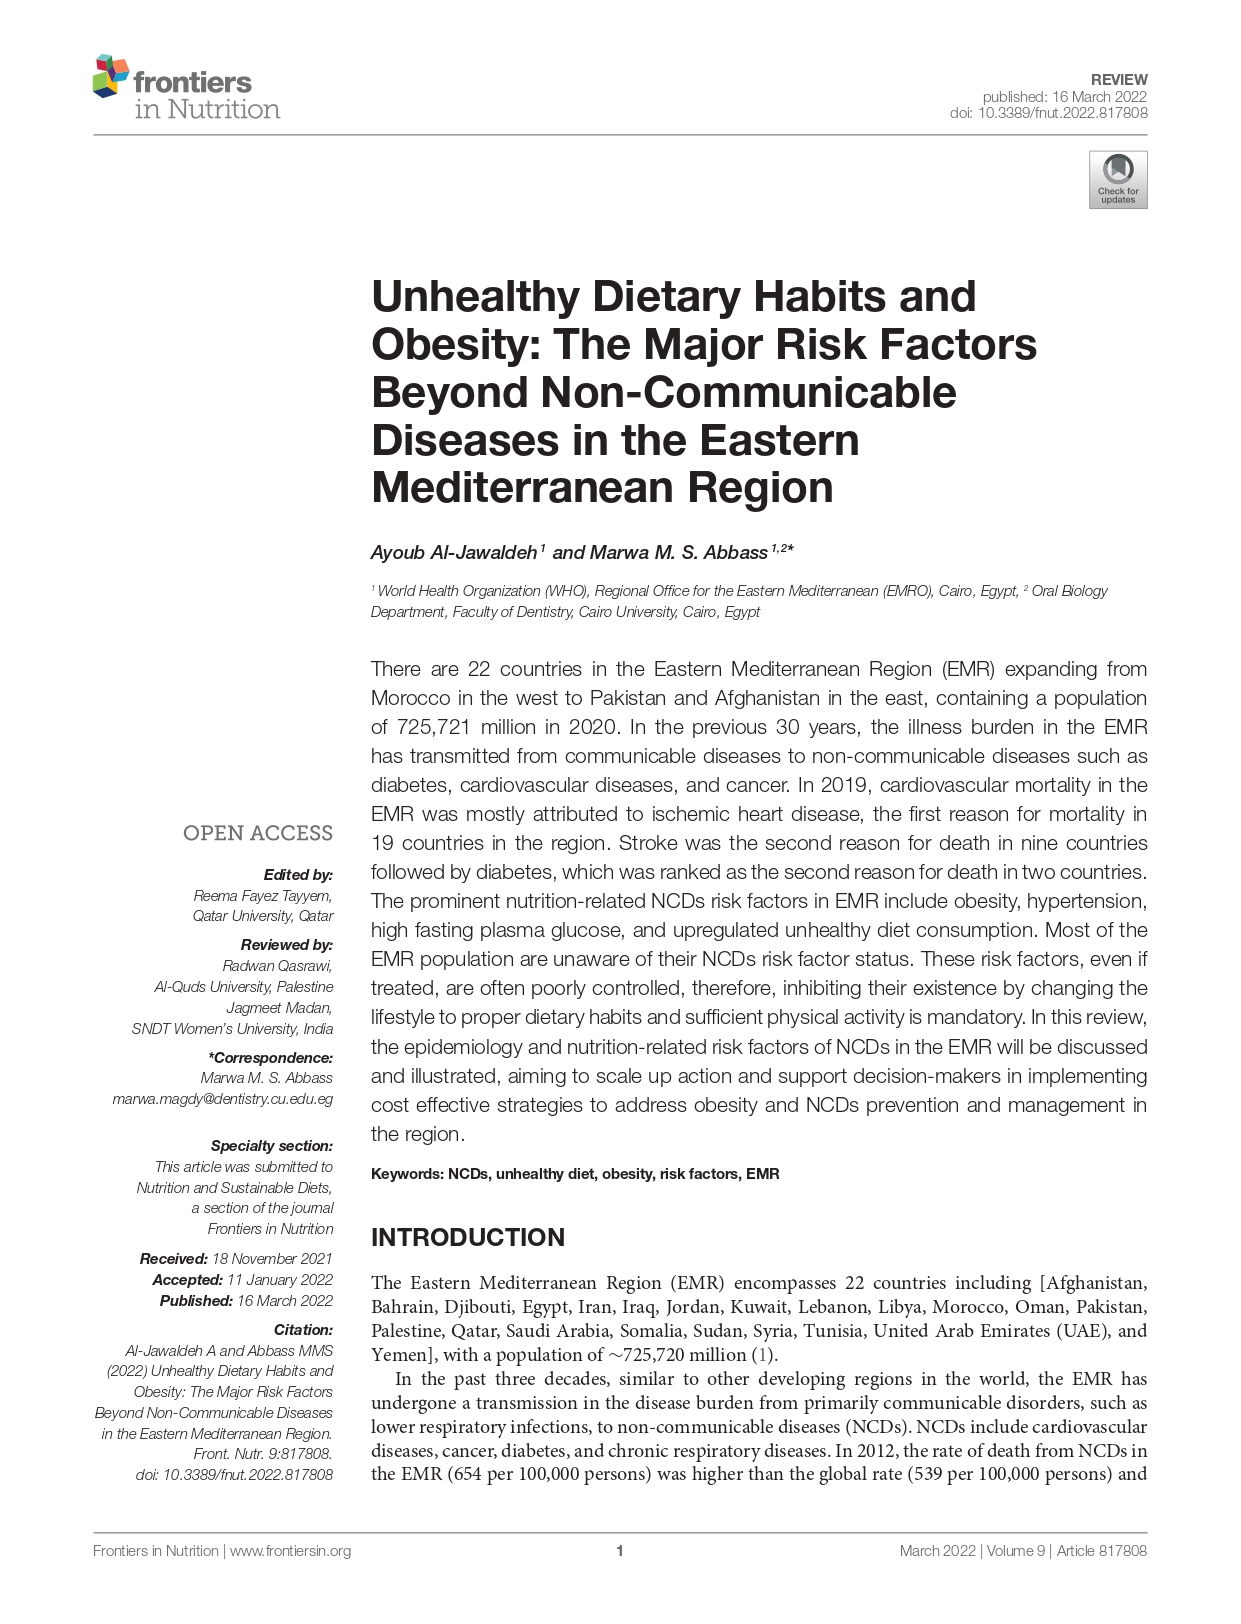 unhealthy_dietary_habits_and_obesity_the_major_risk_factors_beyond_non-communicable_diseases_in_the_eastern_mediterranean_region